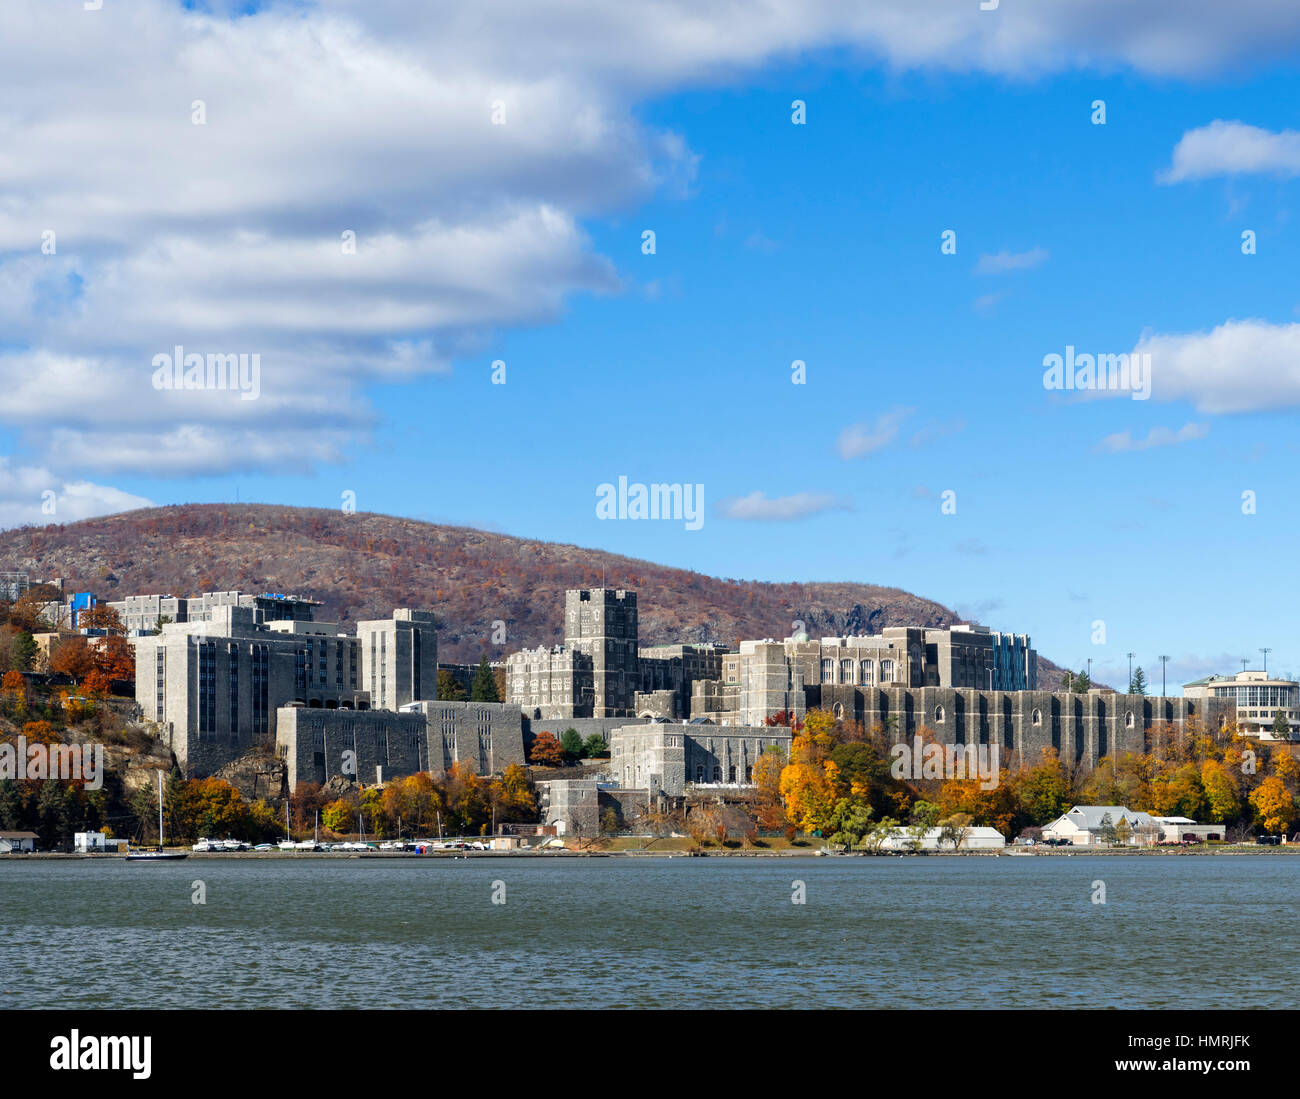 West Point Military Academy.The United States Military Academy from Garrisons Landing on the Hudson River, New York State, USA Stock Photo